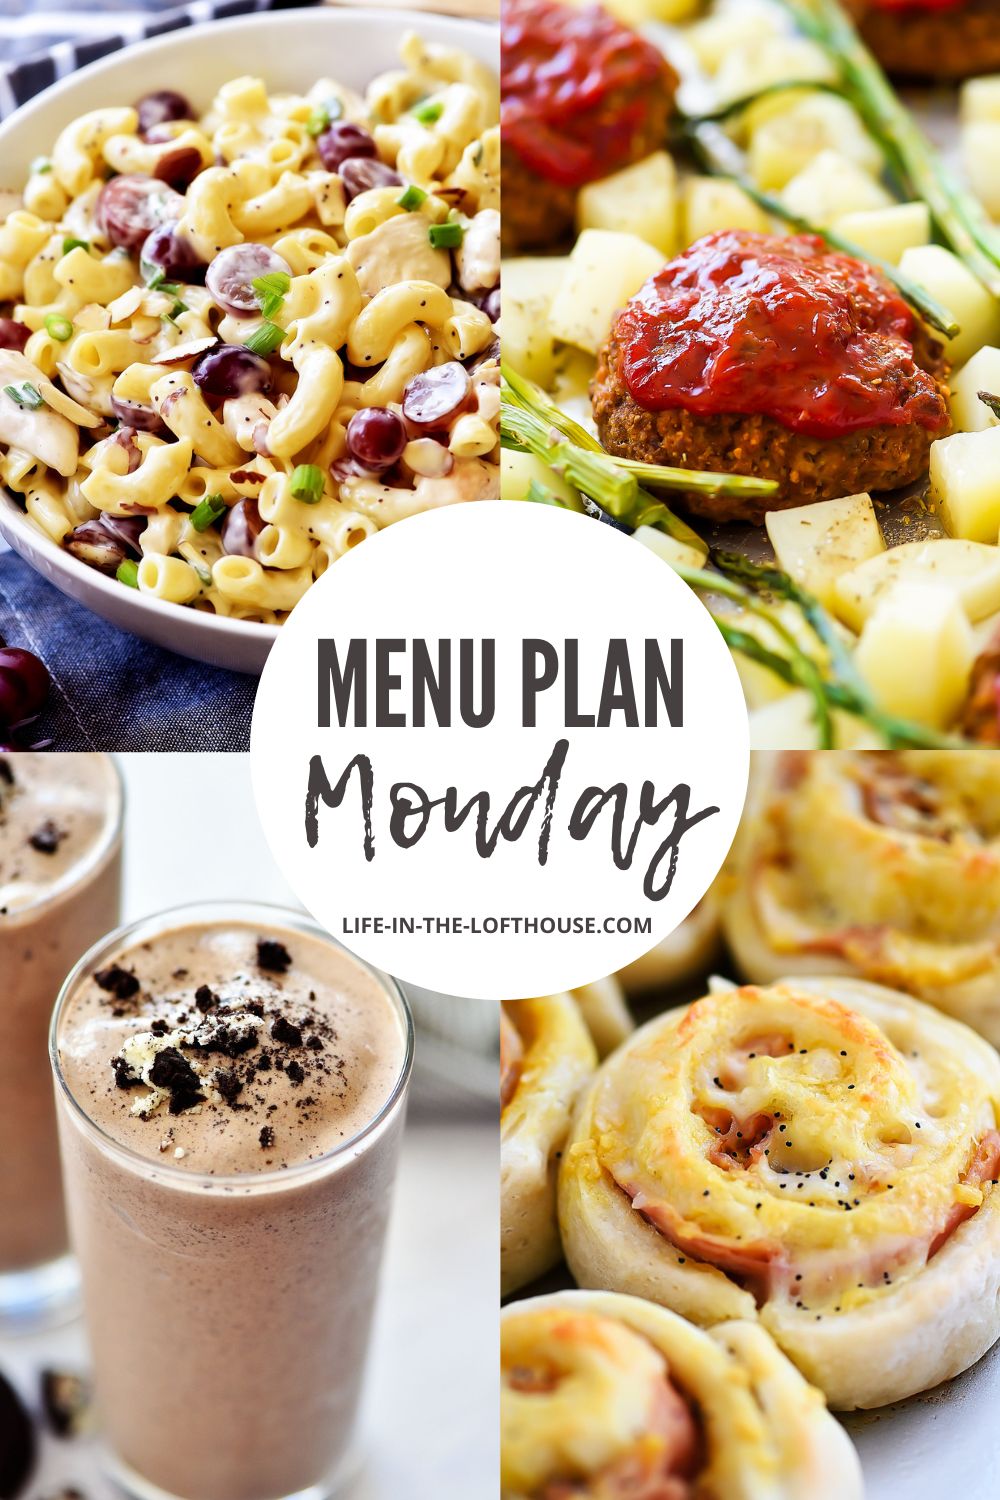 Menu Plan Monday is full of recipes that are 100% approved by kids and adults!